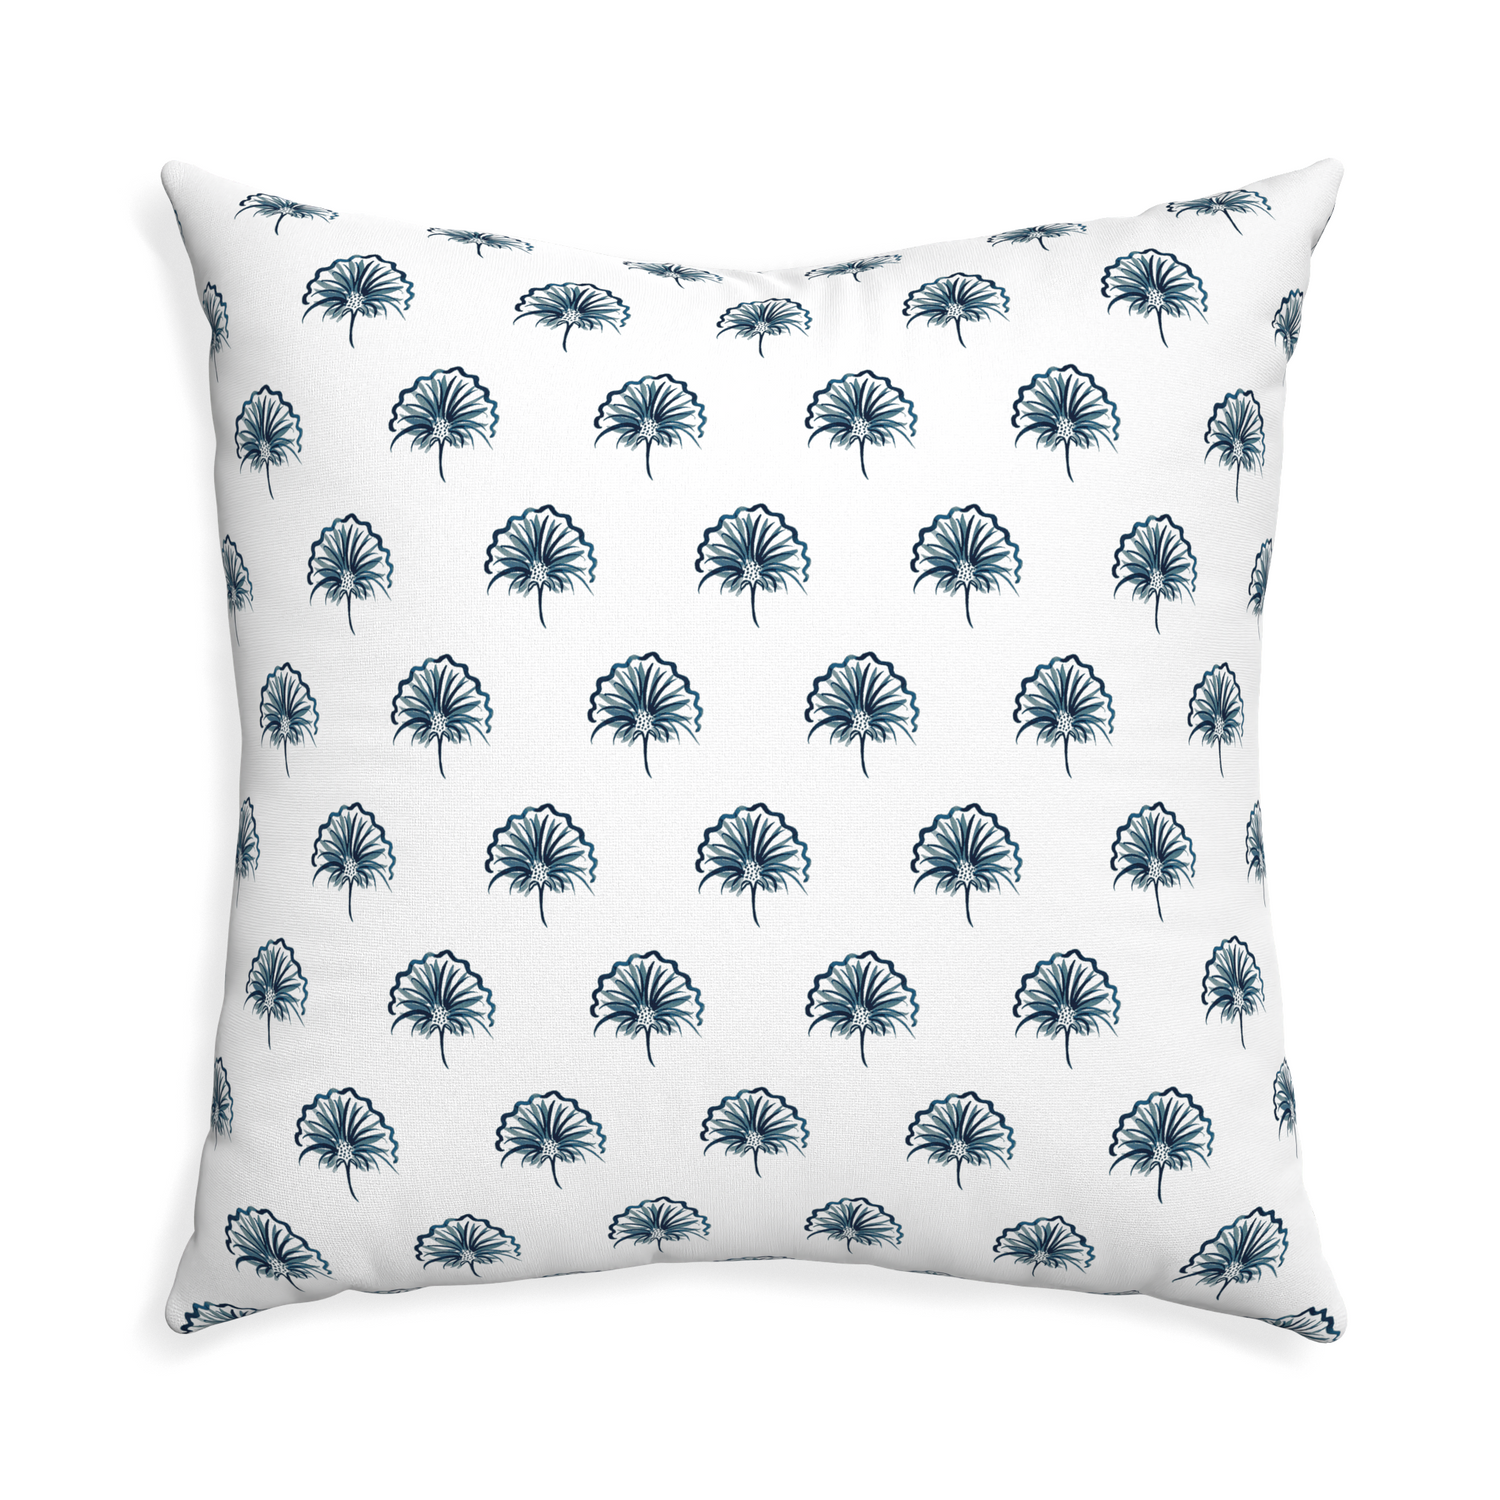 Euro-sham penelope midnight custom floral navypillow with none on white background